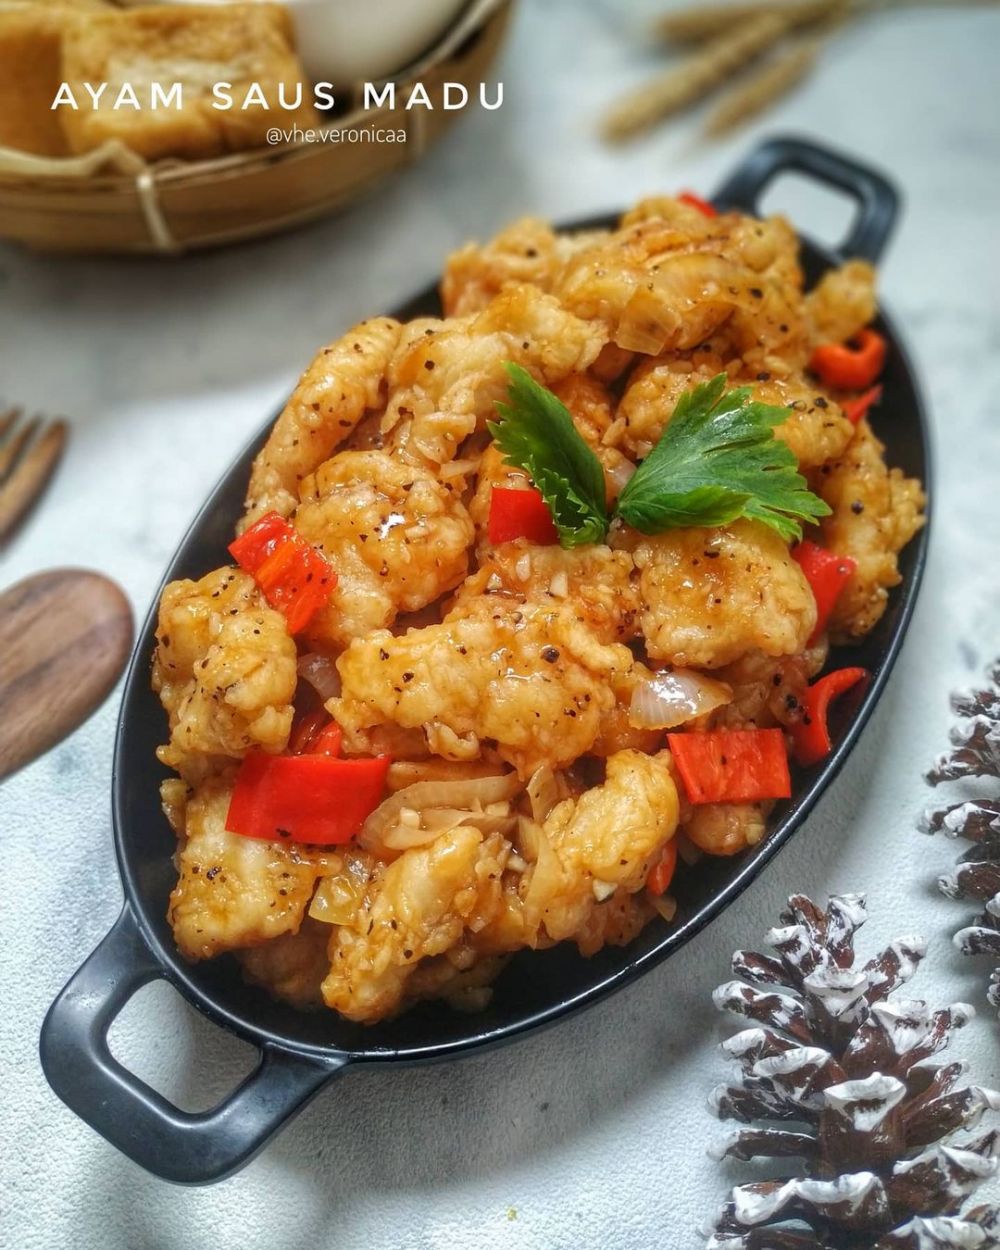 Home-style fried chicken recipe with honey sauce, delicious and makes you addicted